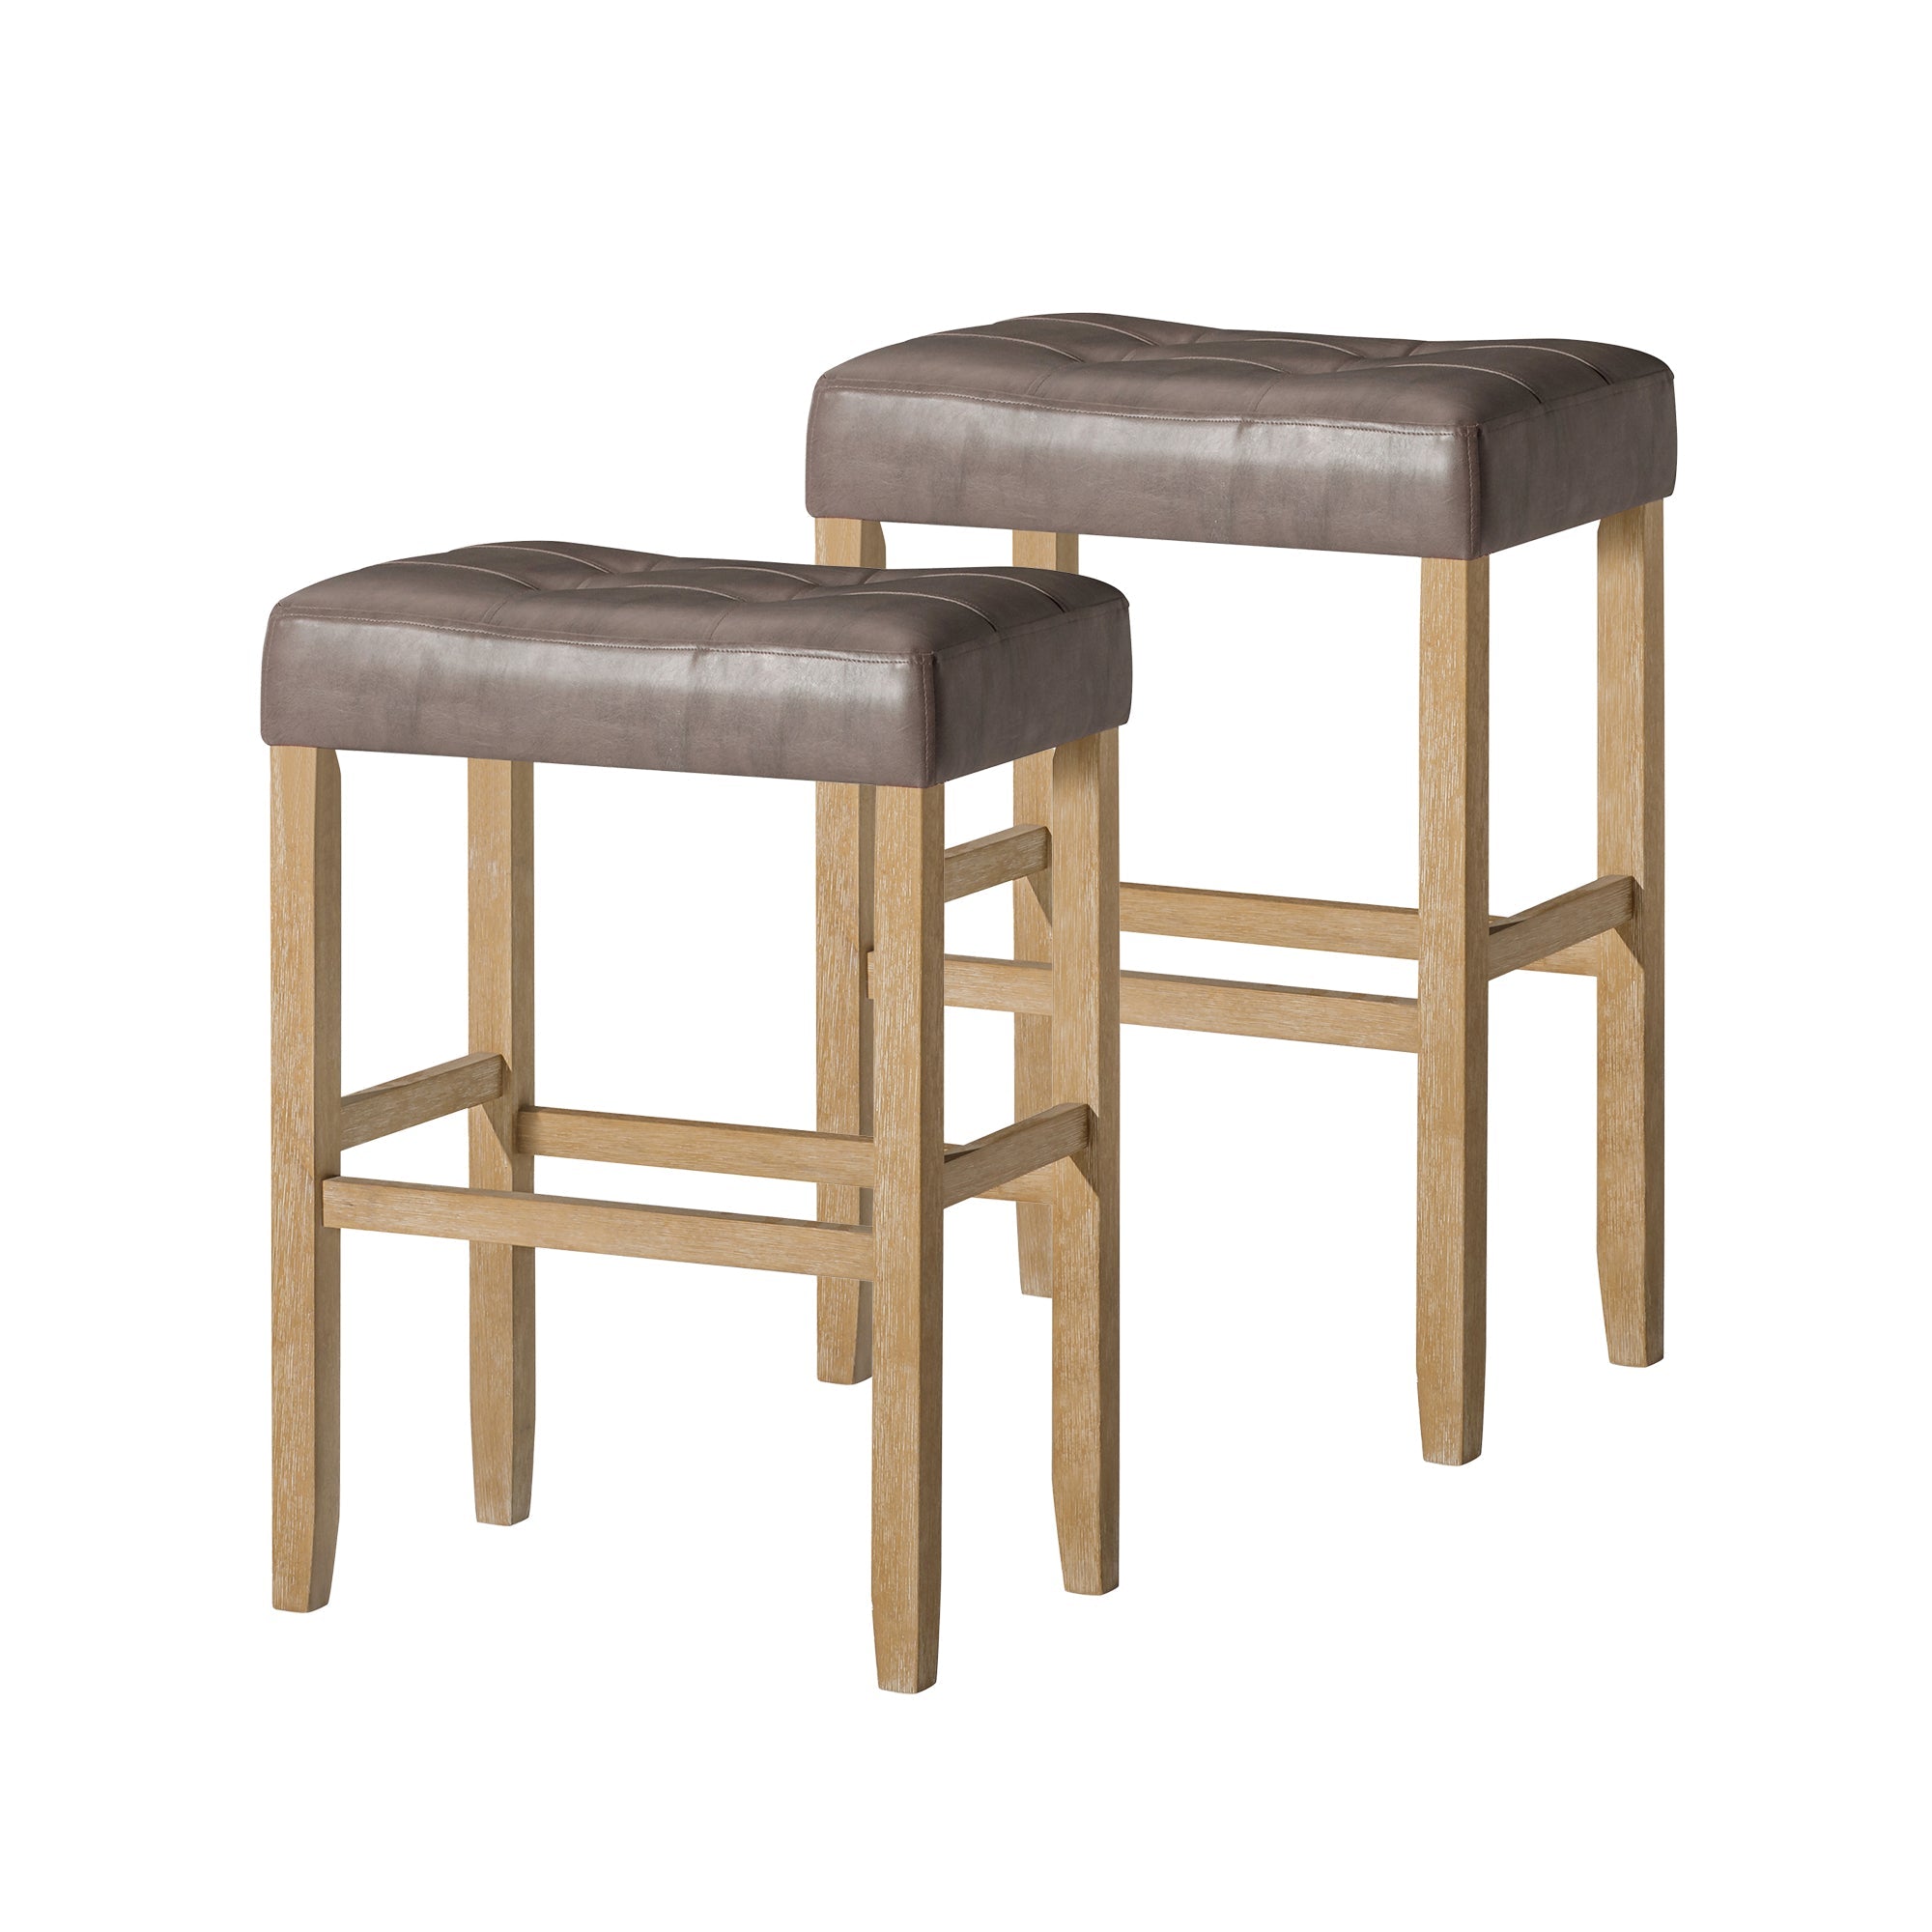 Harper Bar Stool in Weathered Oak Wood Finish with Distressed Grey Vegan Leather, Set of 2